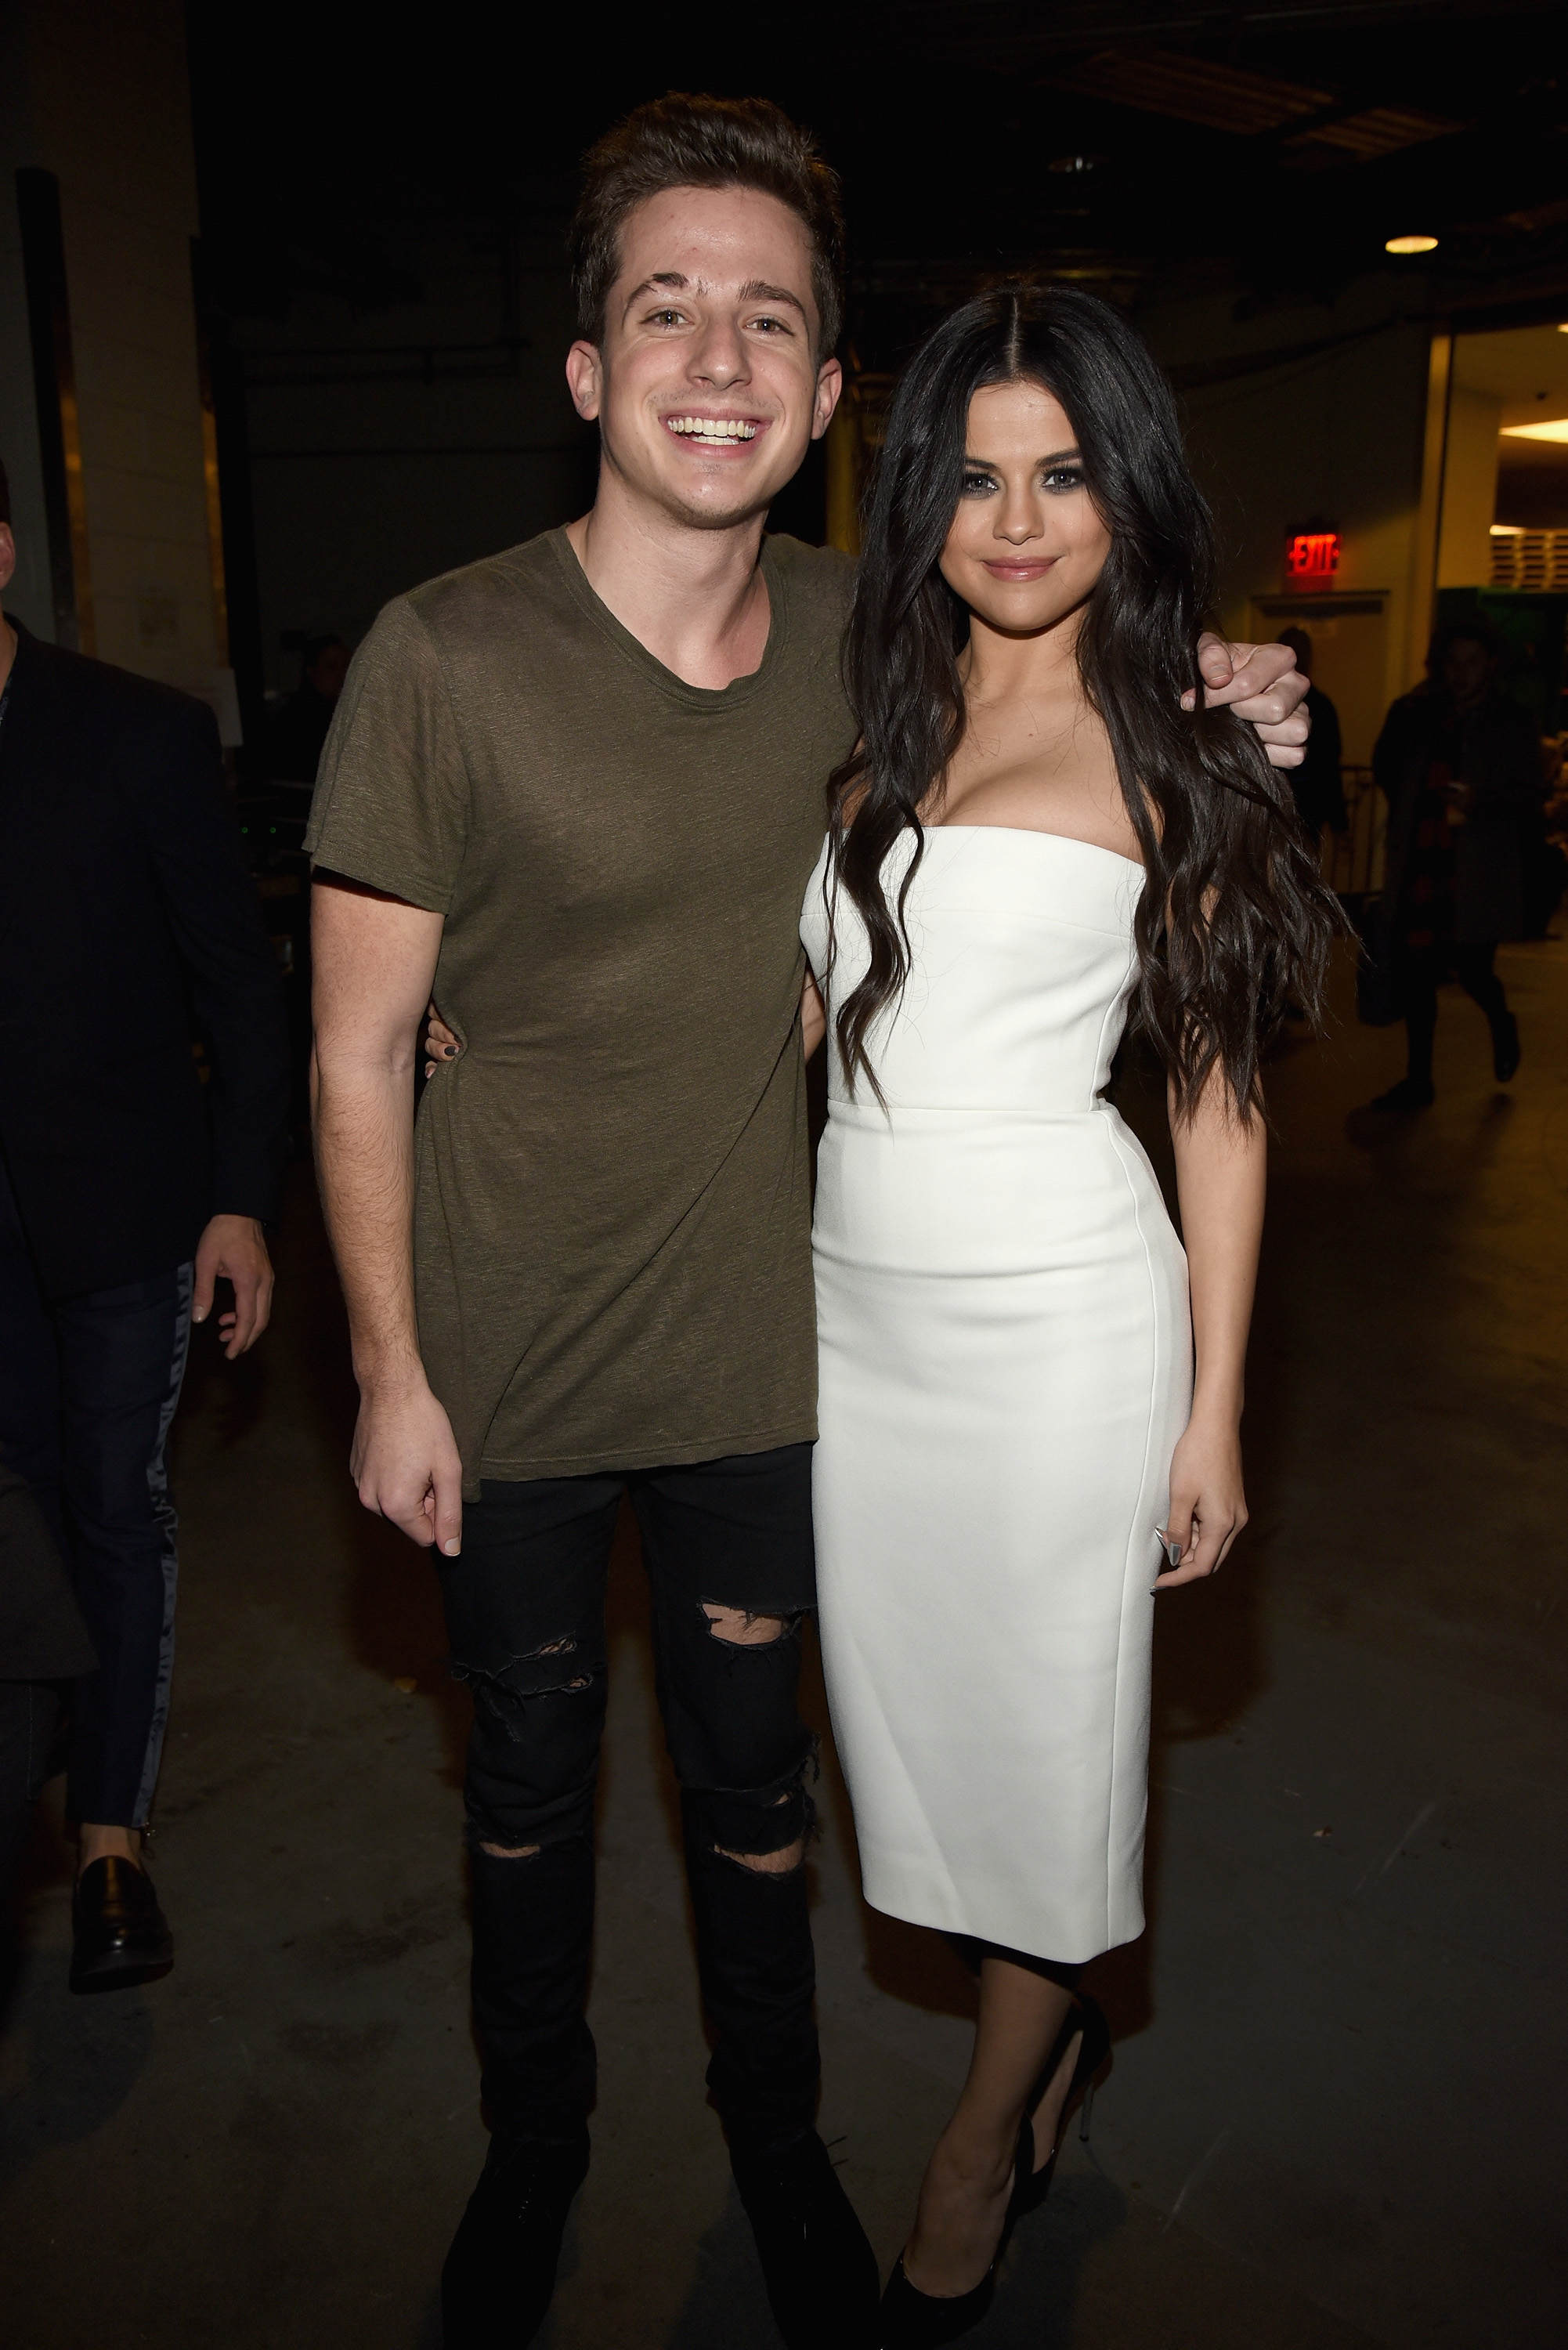 Charlie Puth and Selena Gomez at Z100's Jingle Ball 2015 on December 11, 2015, in New York City. | Source: Getty Images